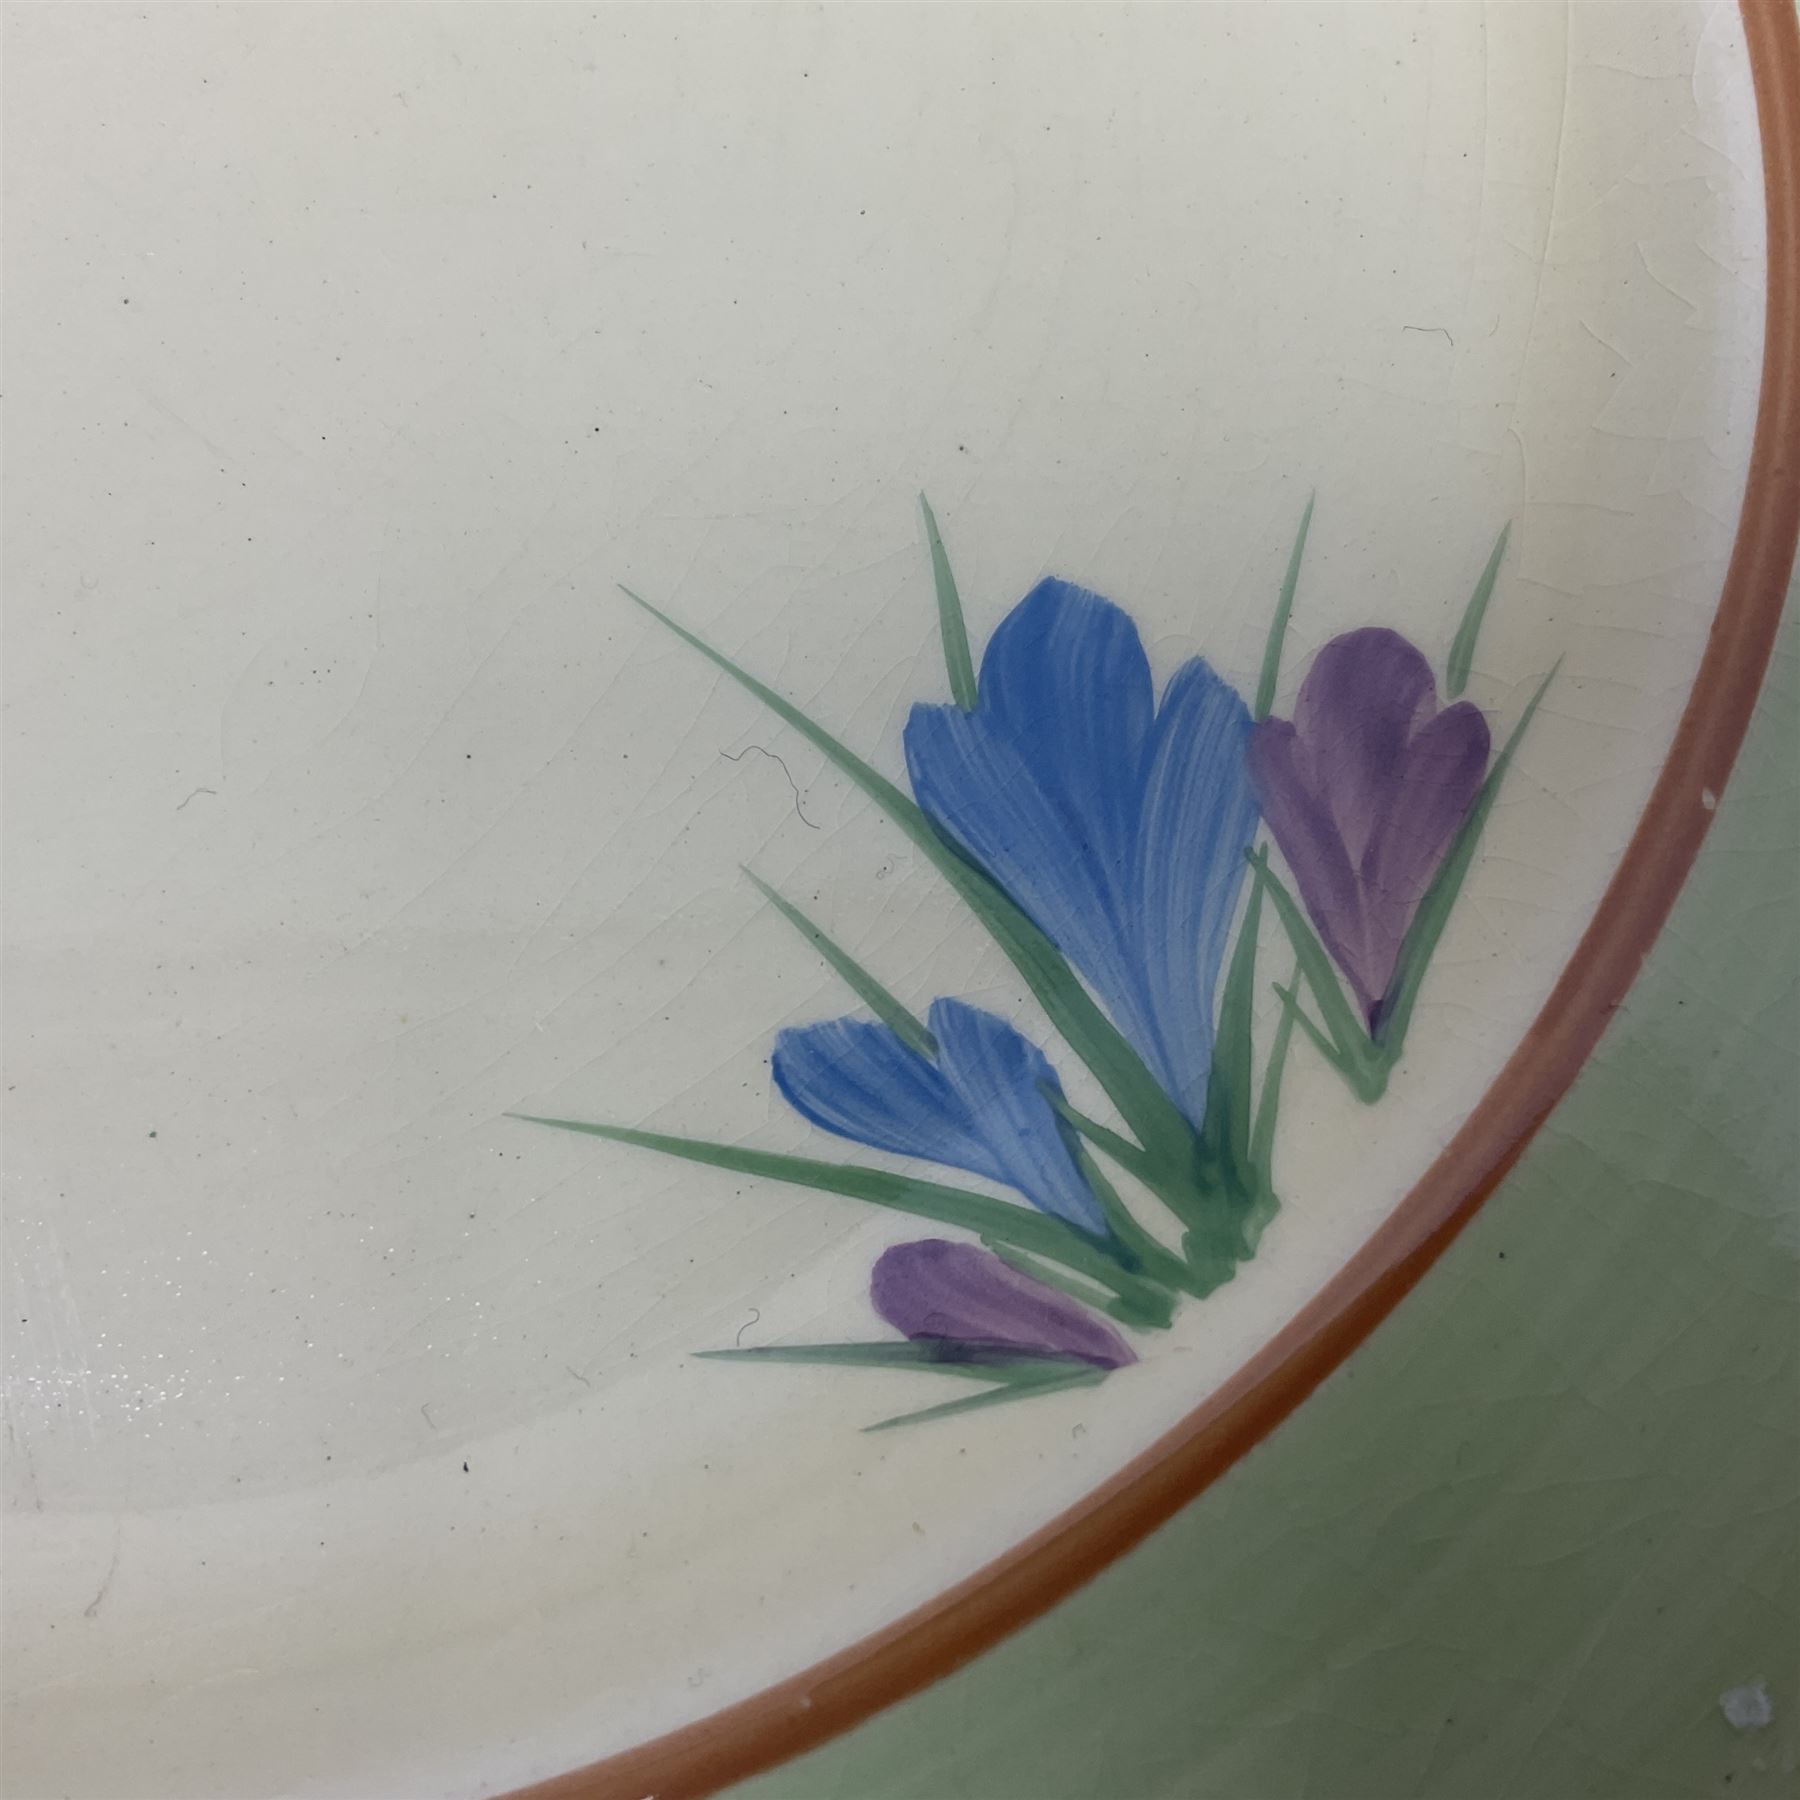 Clarice Cliff trio and plate in Spring Crocus pattern - Image 6 of 15